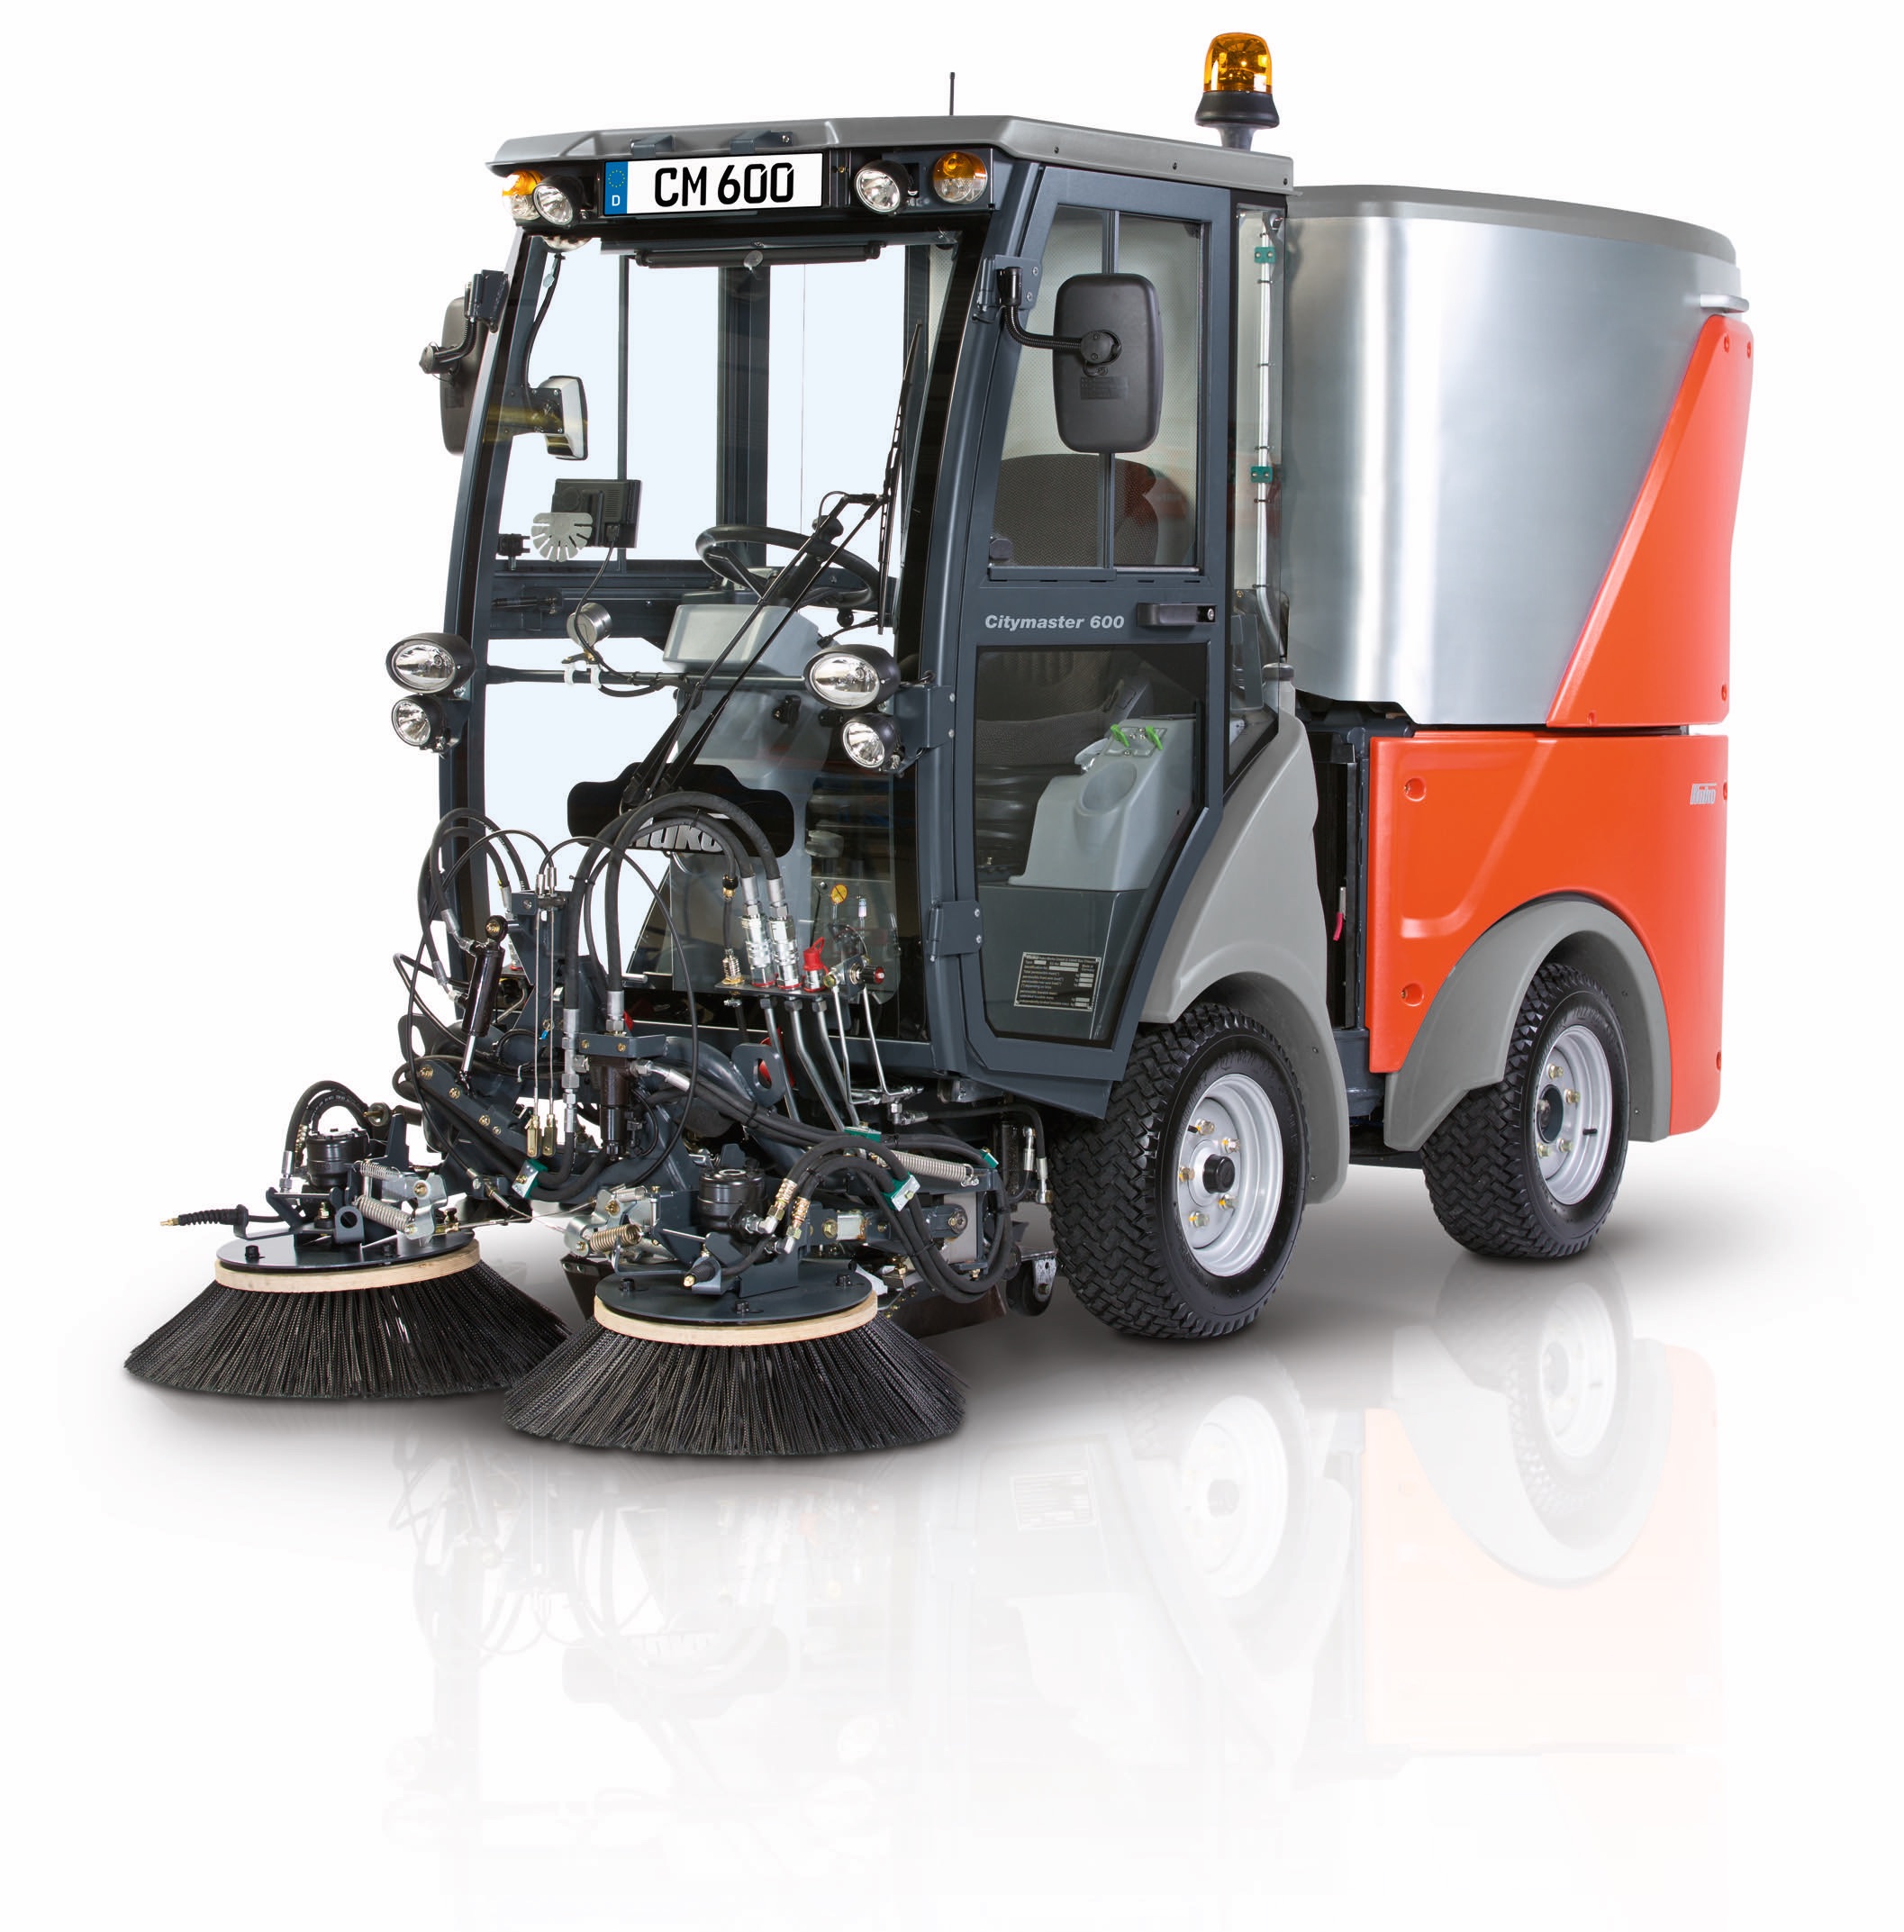 Airside Snow Clearing & Sweeping Machines, Floor Cleaning Machines for Terminals and Landside Multifunctional Vehicles